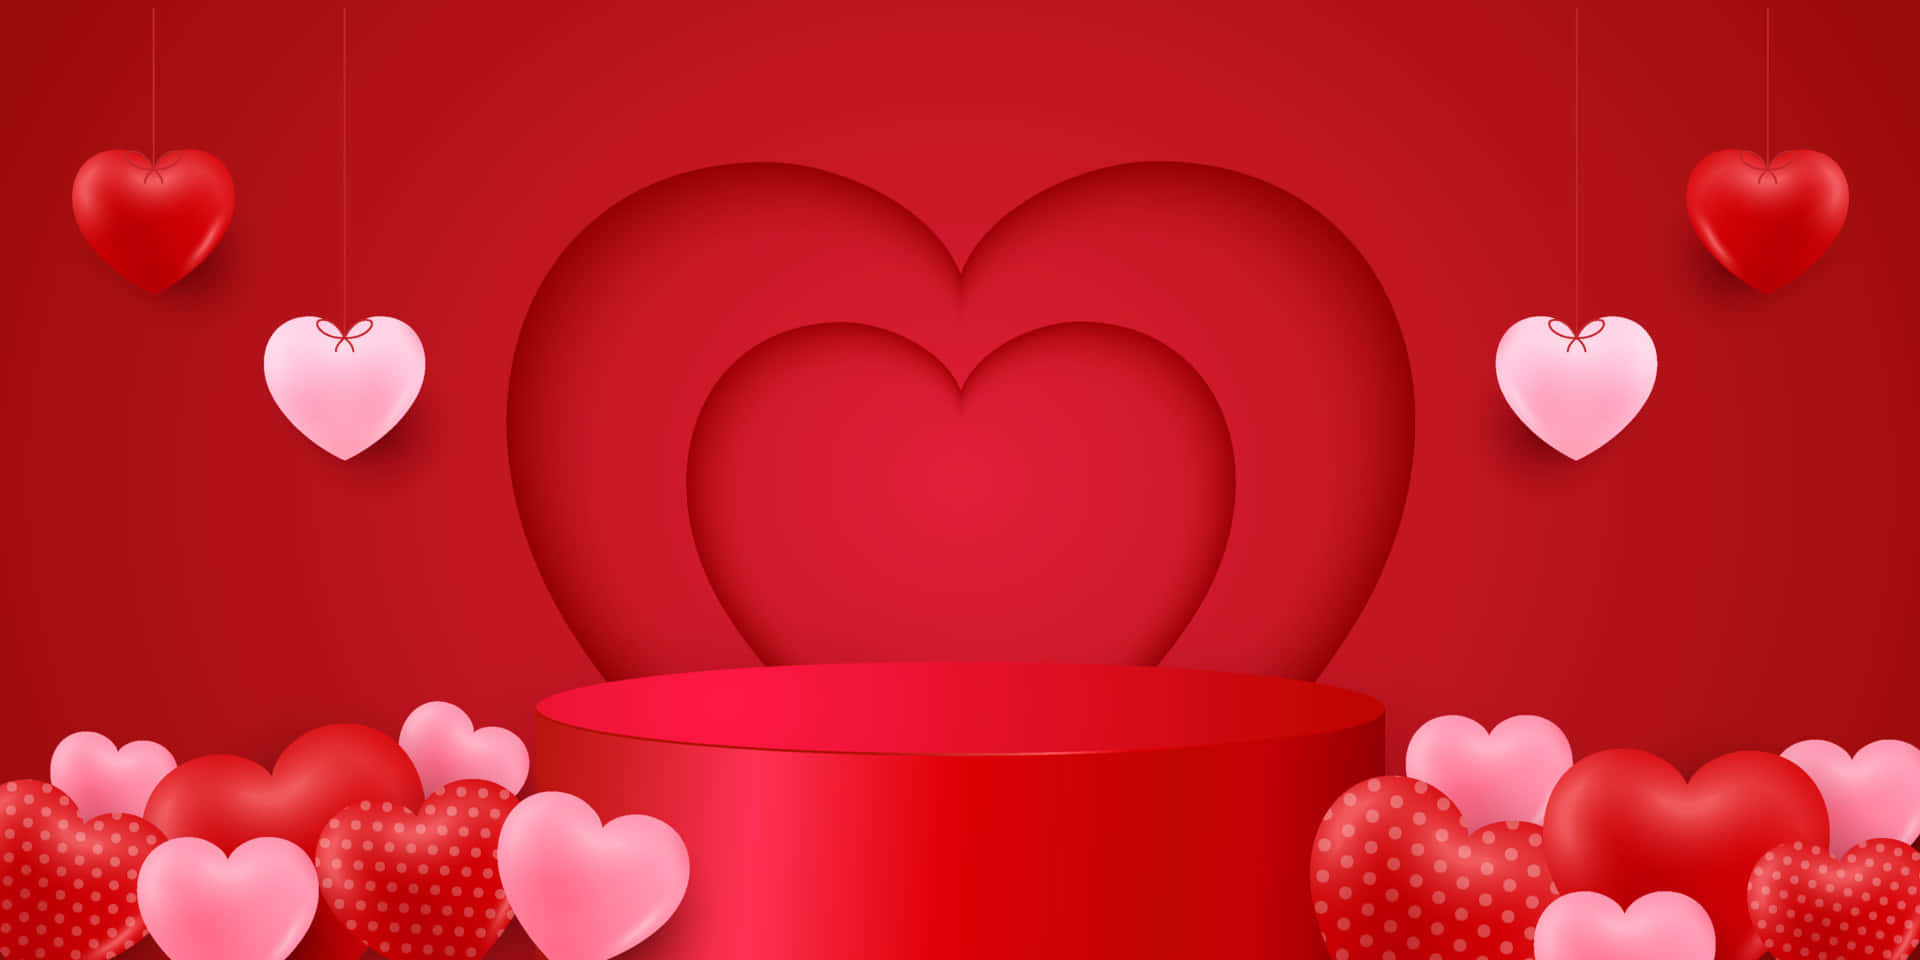 Valentine's Day Background With Red Heart Shape